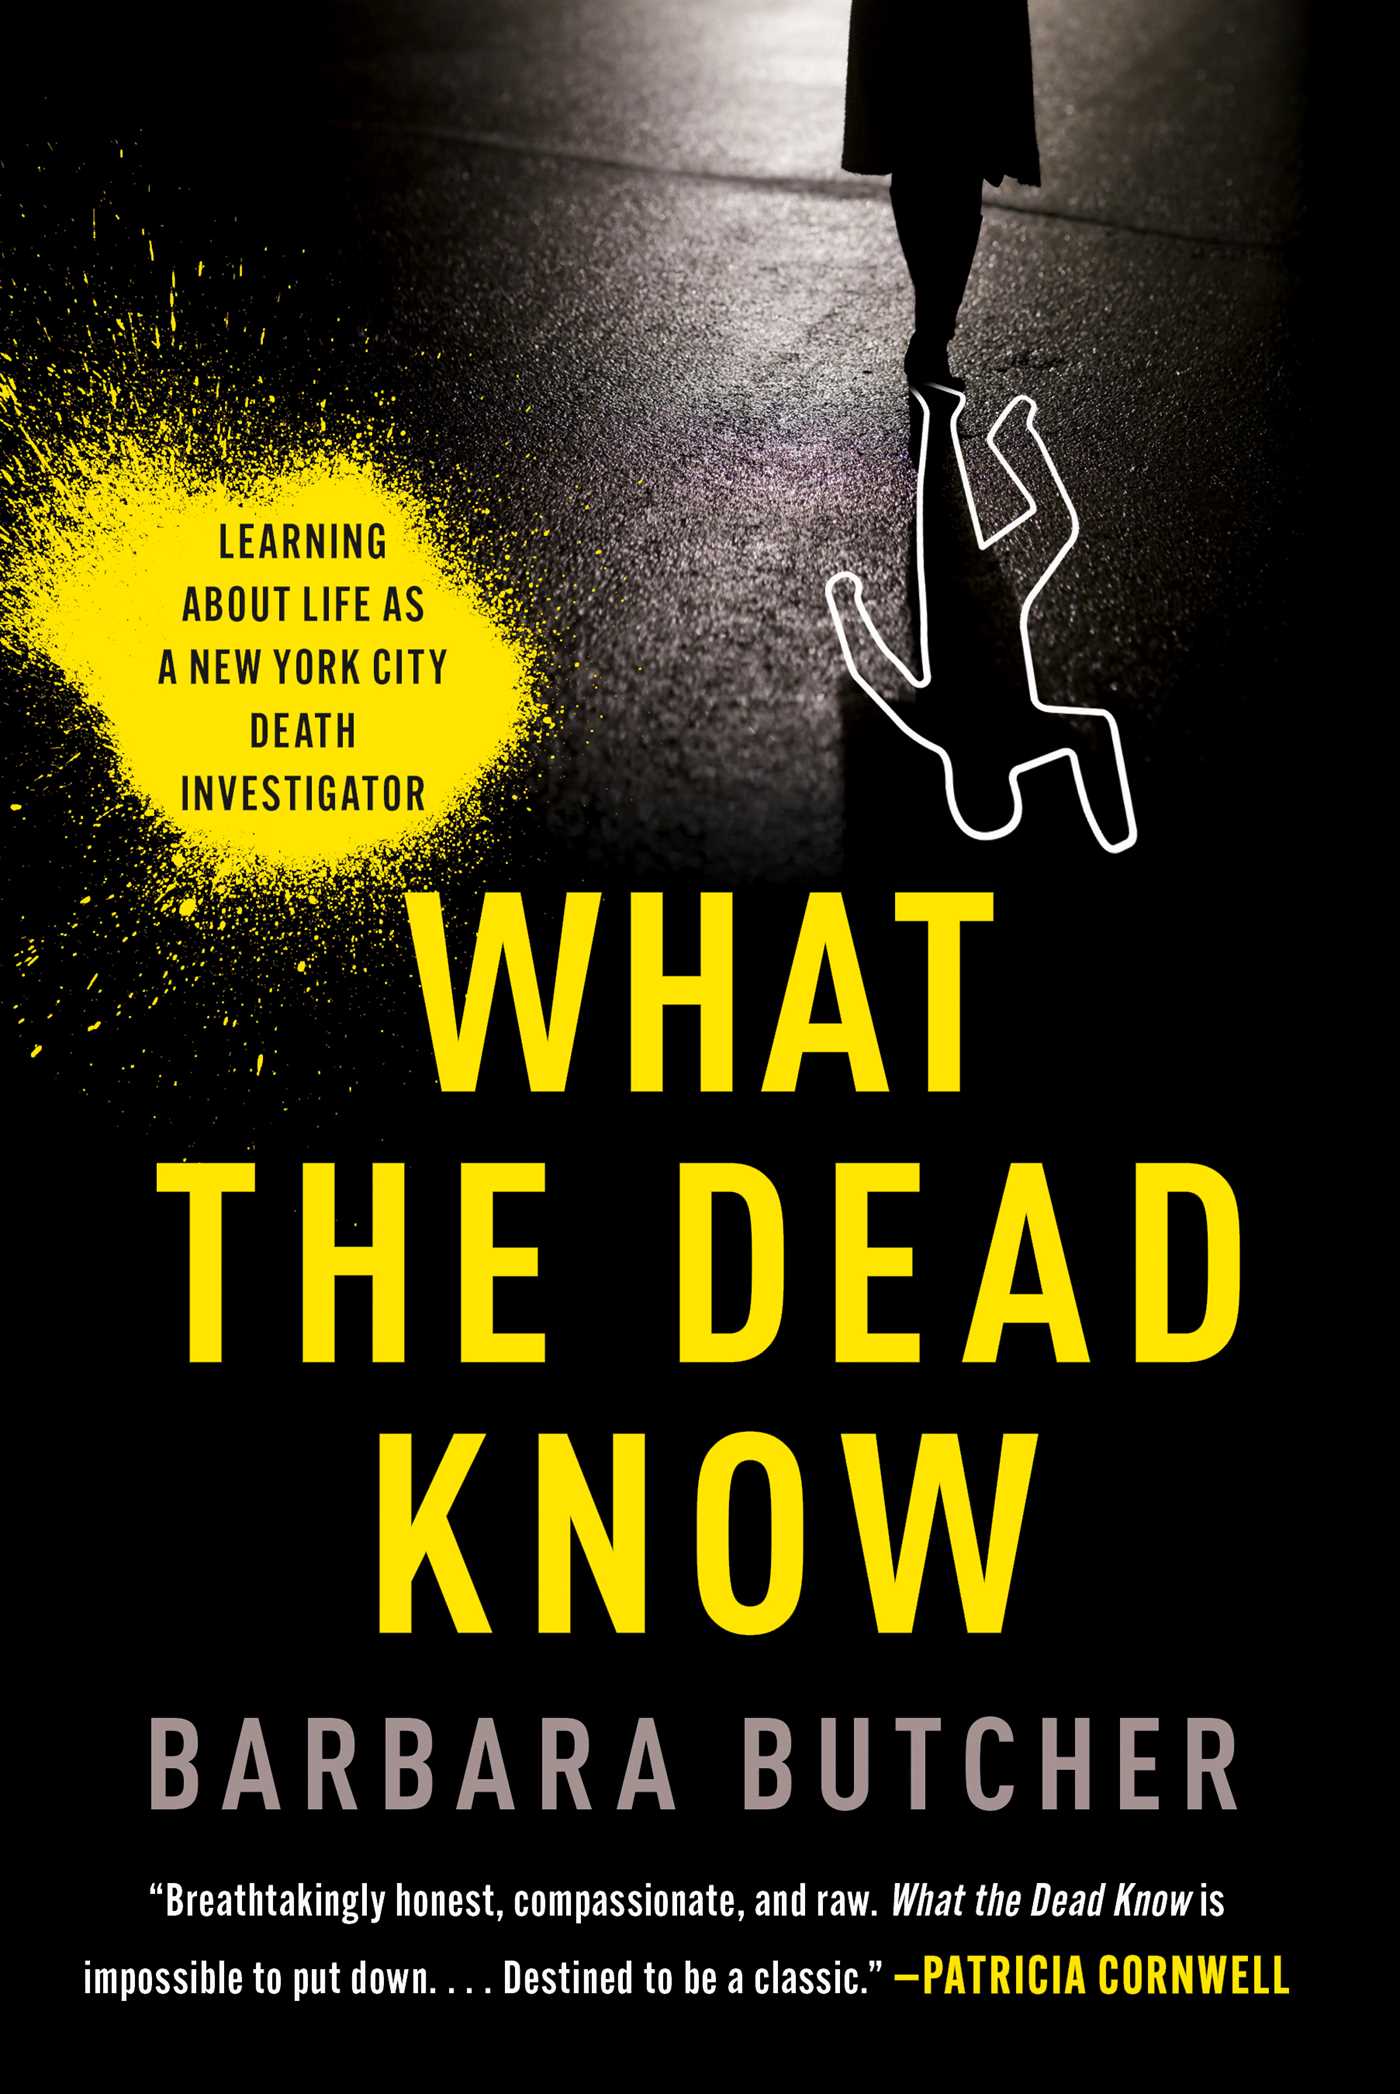 Image for "What the Dead Know"